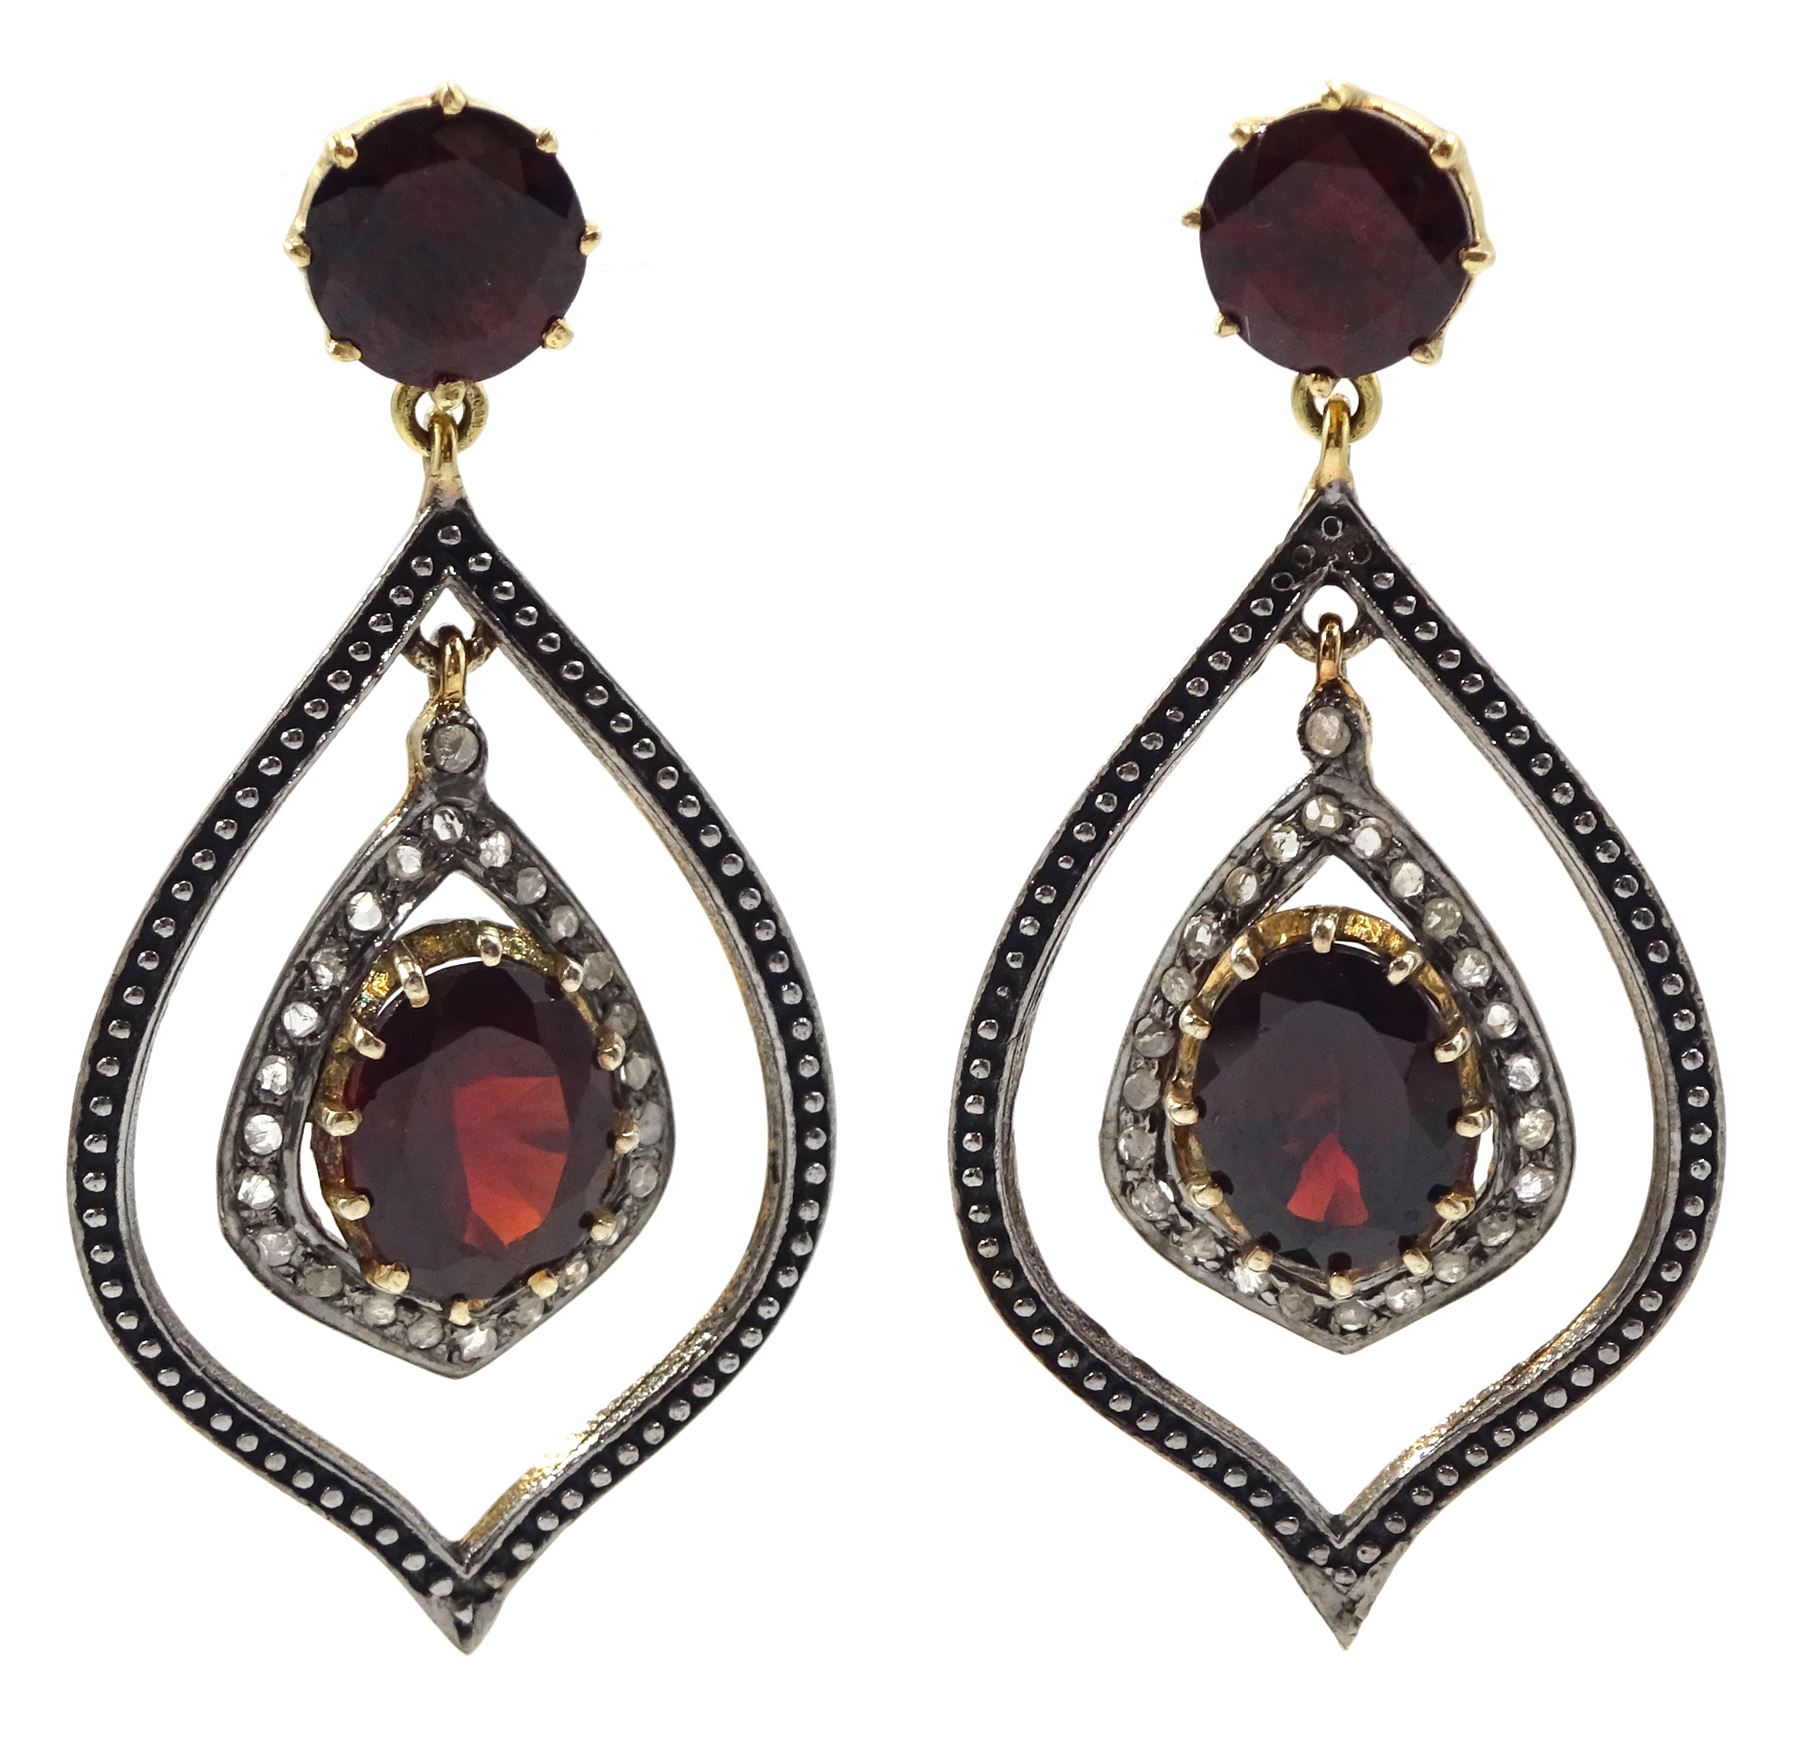 Pair of teardrop shaped oval and round garnet and diamond set pendant earrings